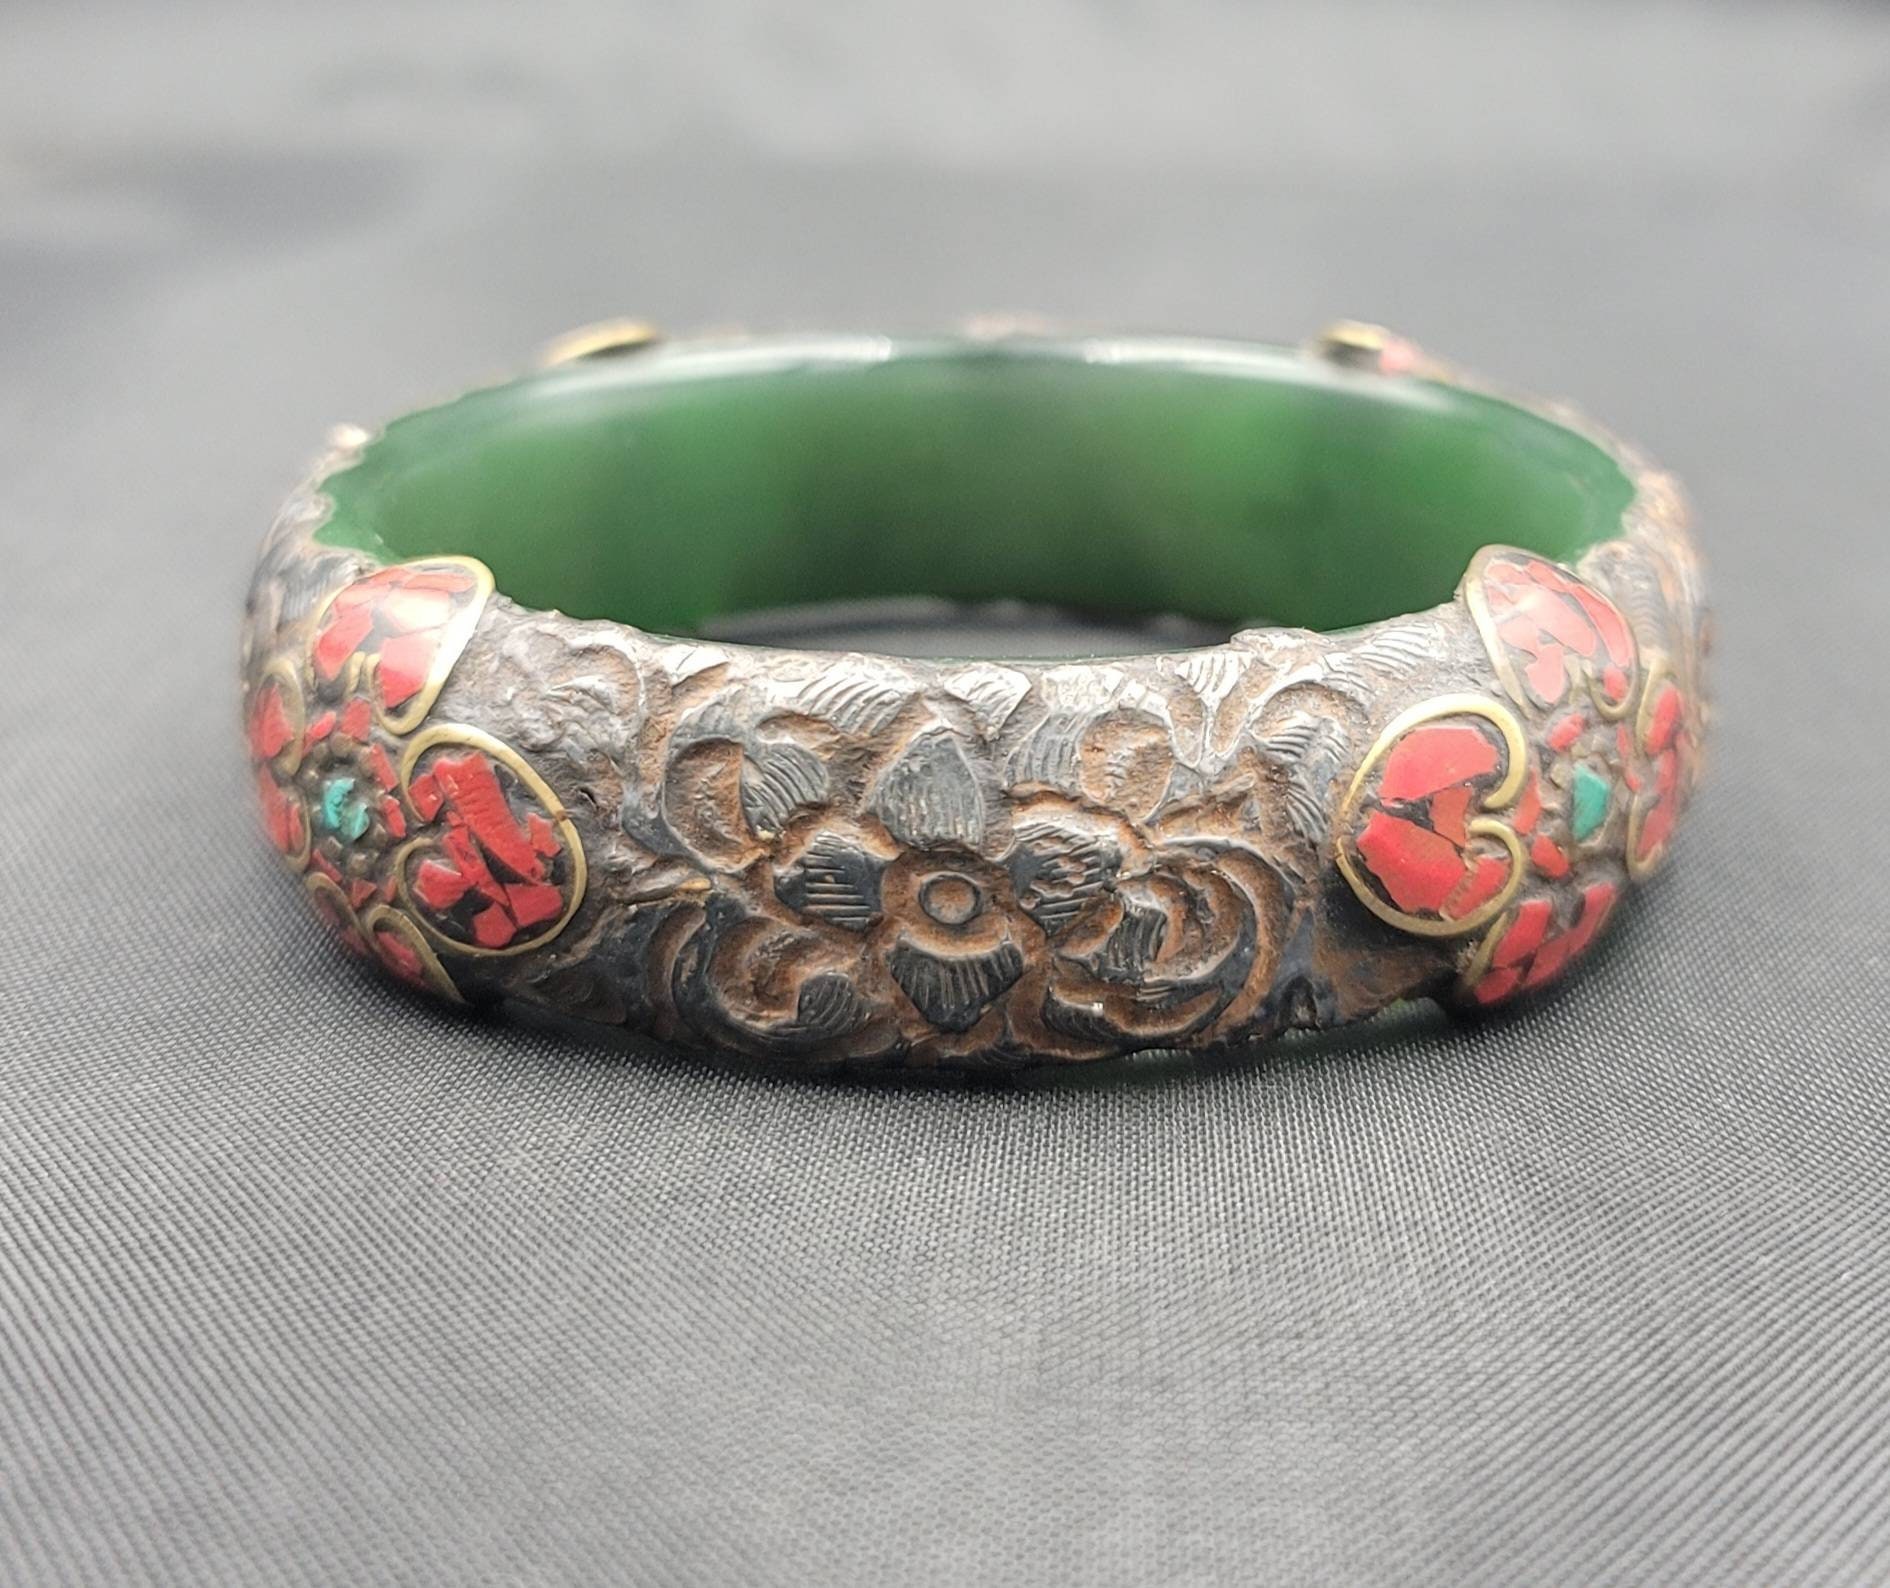 Buy Chinese Antique Pure Hand-carved Exquisite Rare High Ice Jade Bracelet,  Rare and Precious, Can Be Collected Online in India - Etsy